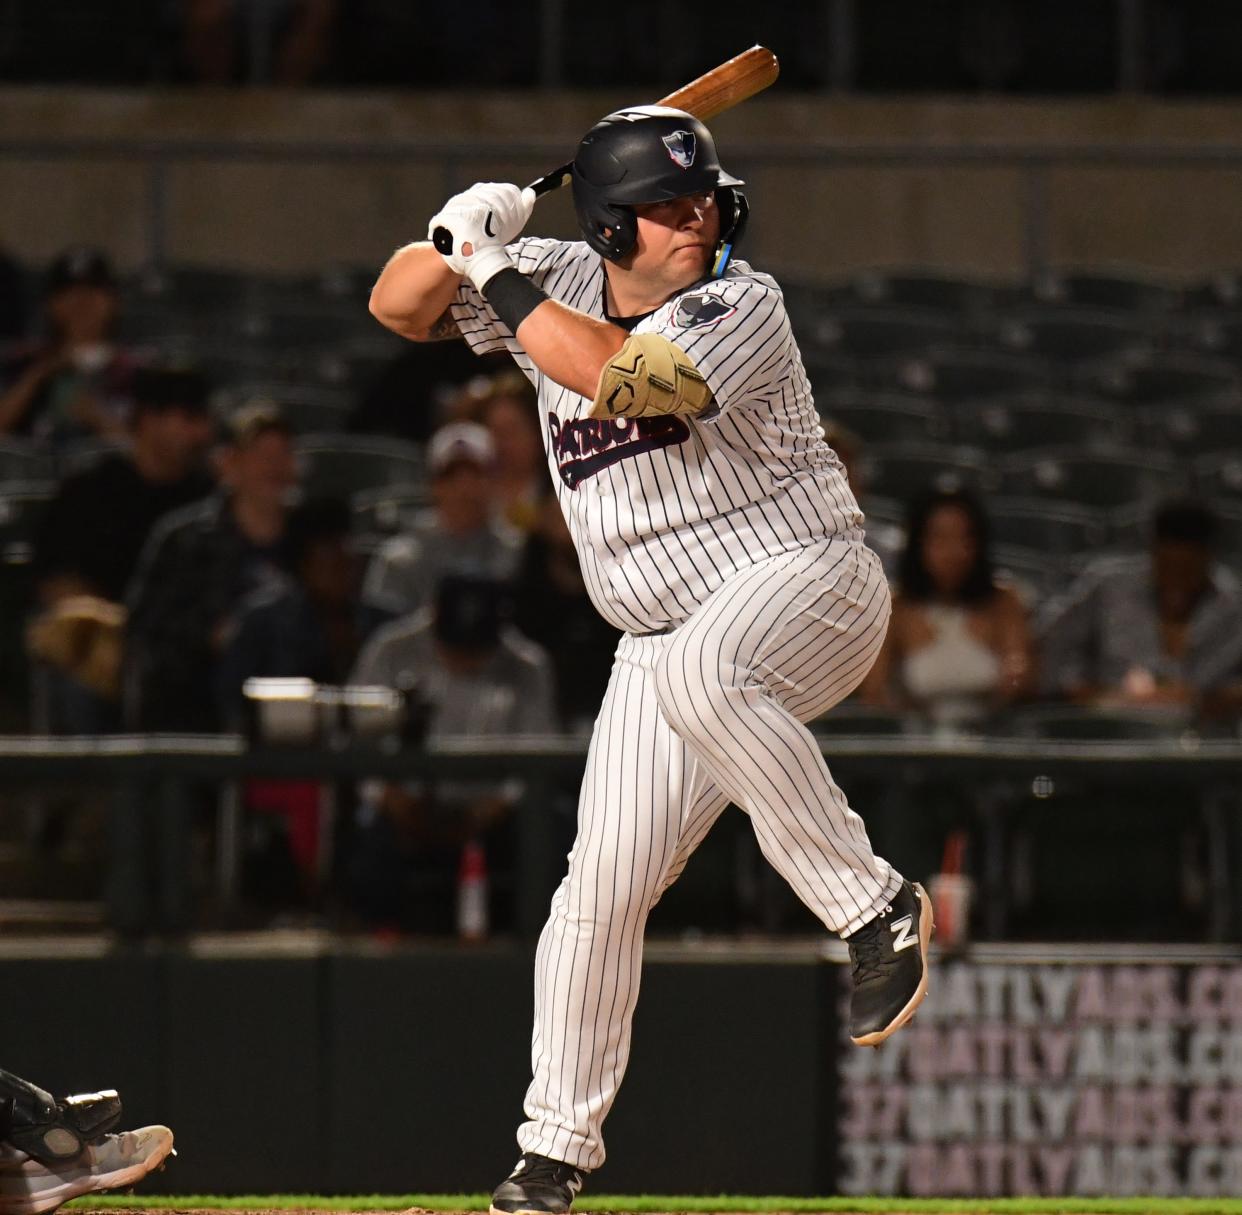 Spencer Henson was selected by the Yankees in the ninth round in 2019 from Oral Roberts.